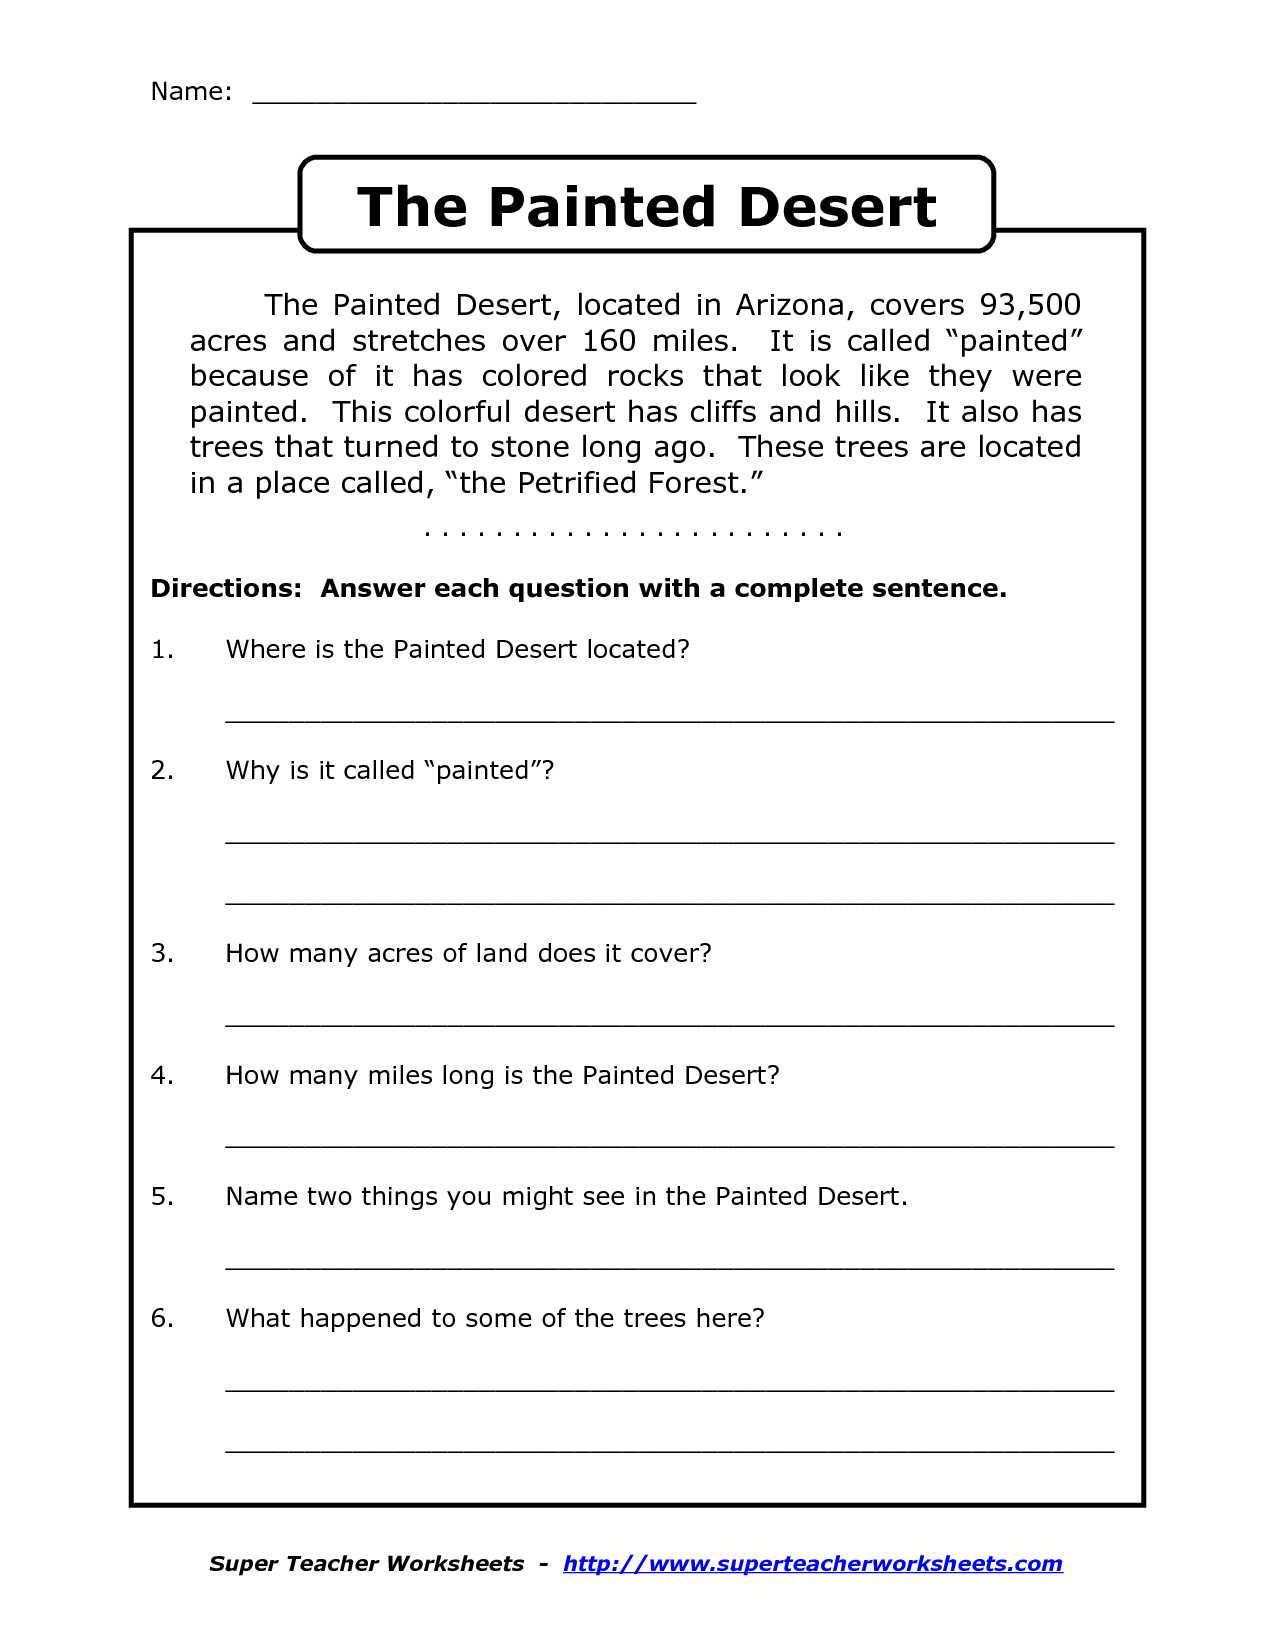 Close Reading Worksheet High School Along with Reading Worksheets for Grade 2 the Best Worksheets Image Collection